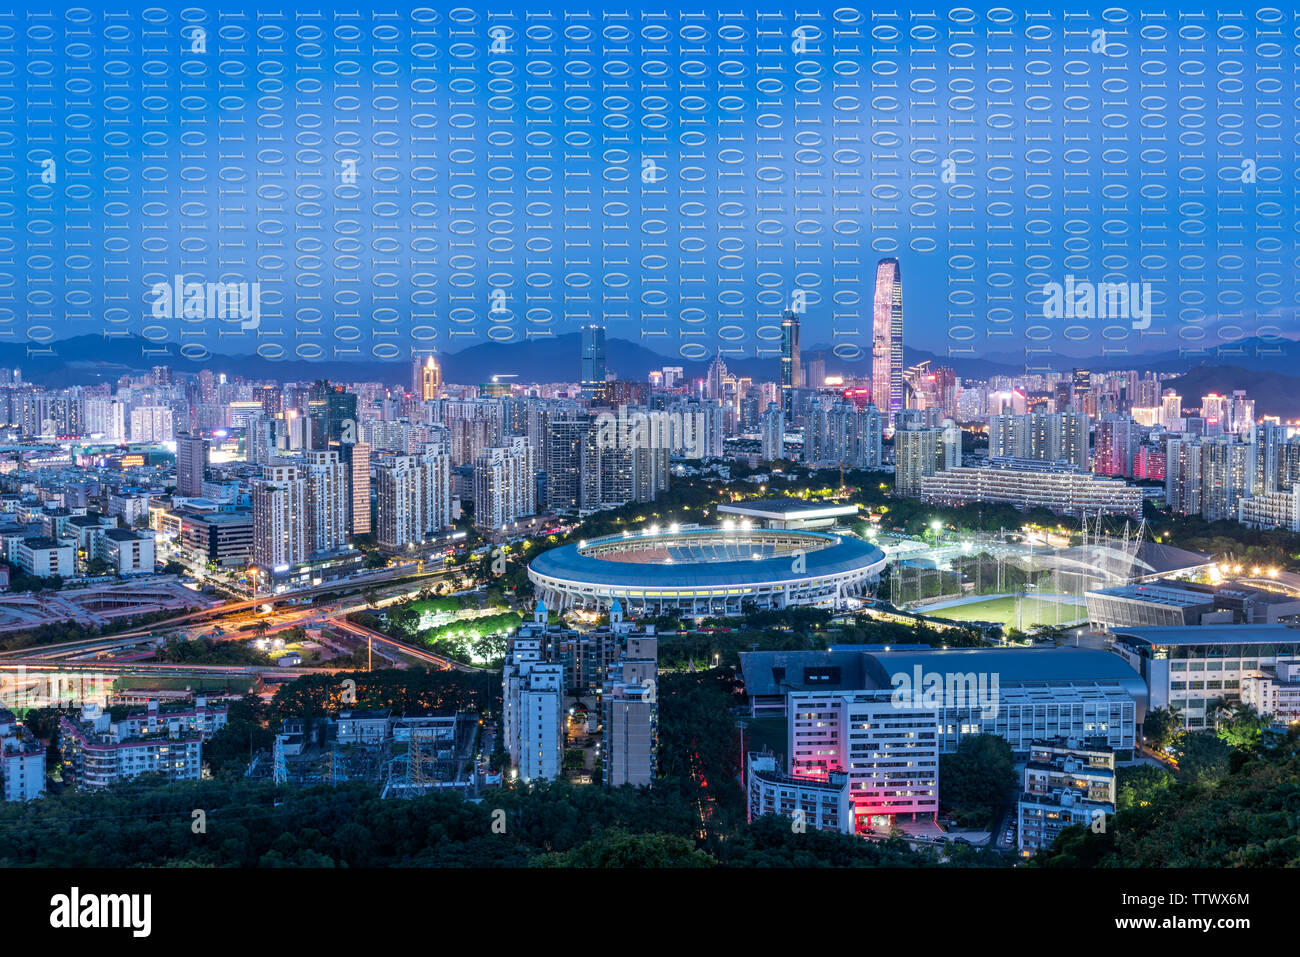 Shenzhen Urban Architecture and Science and Technology Concept Stock Photo